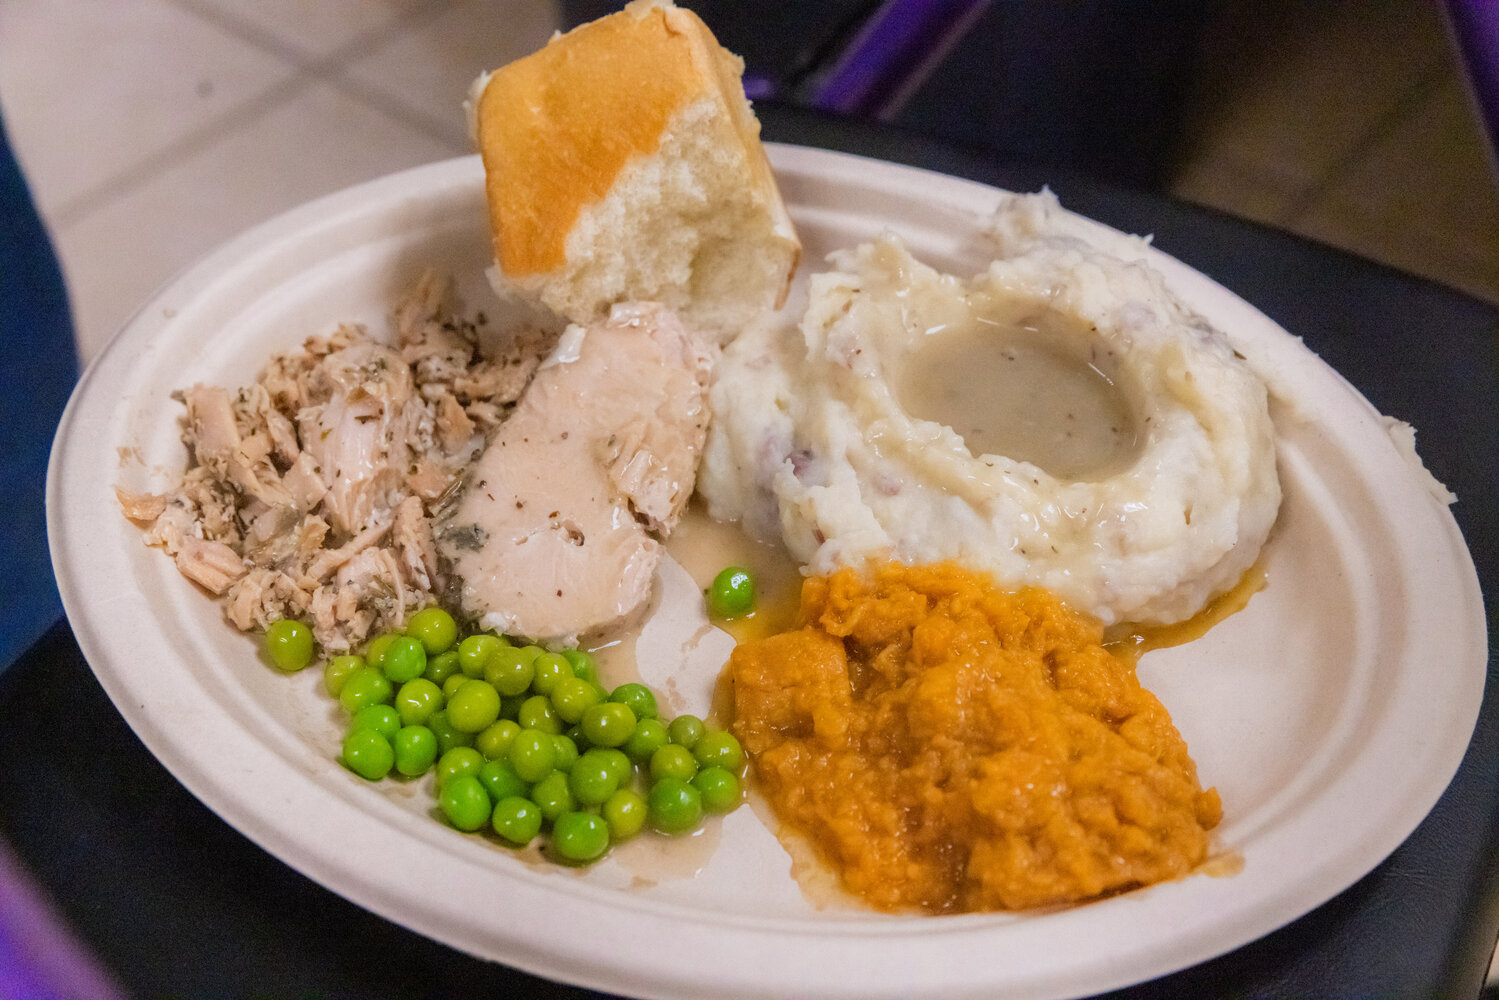 Turkey, veggies, bread, potatoes and more are served on Thanksgiving at Immanuel Lutheran Church in Centralia on Thursday, Nov. 23.